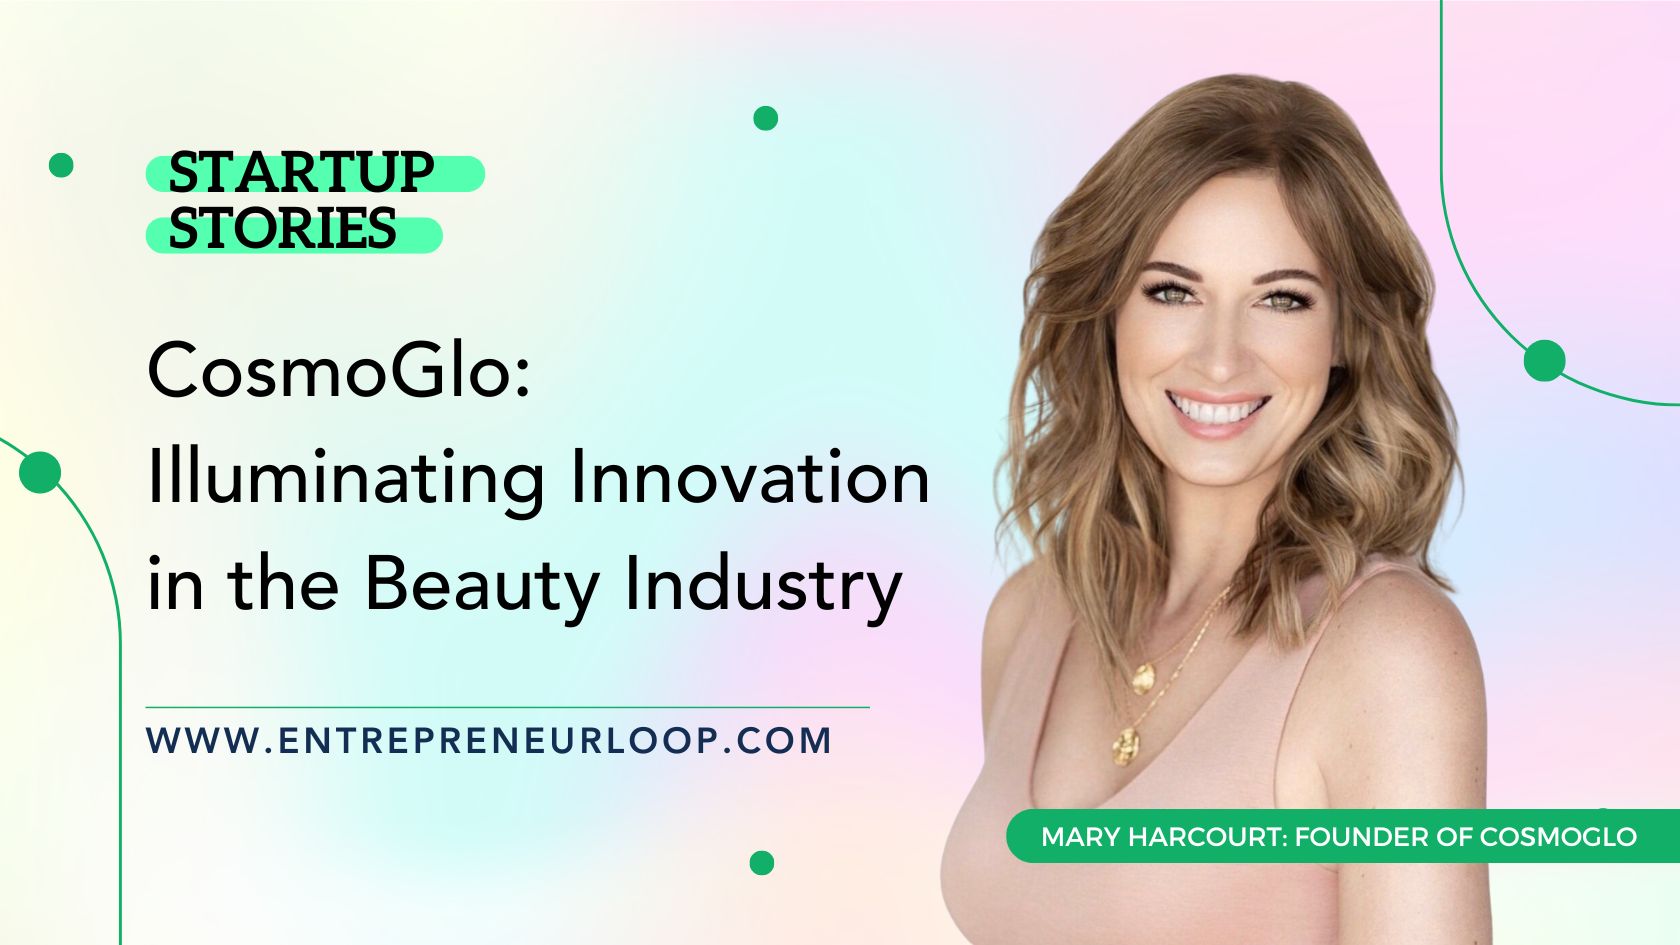 Mary Harcourt: Founder of CosmoGlo